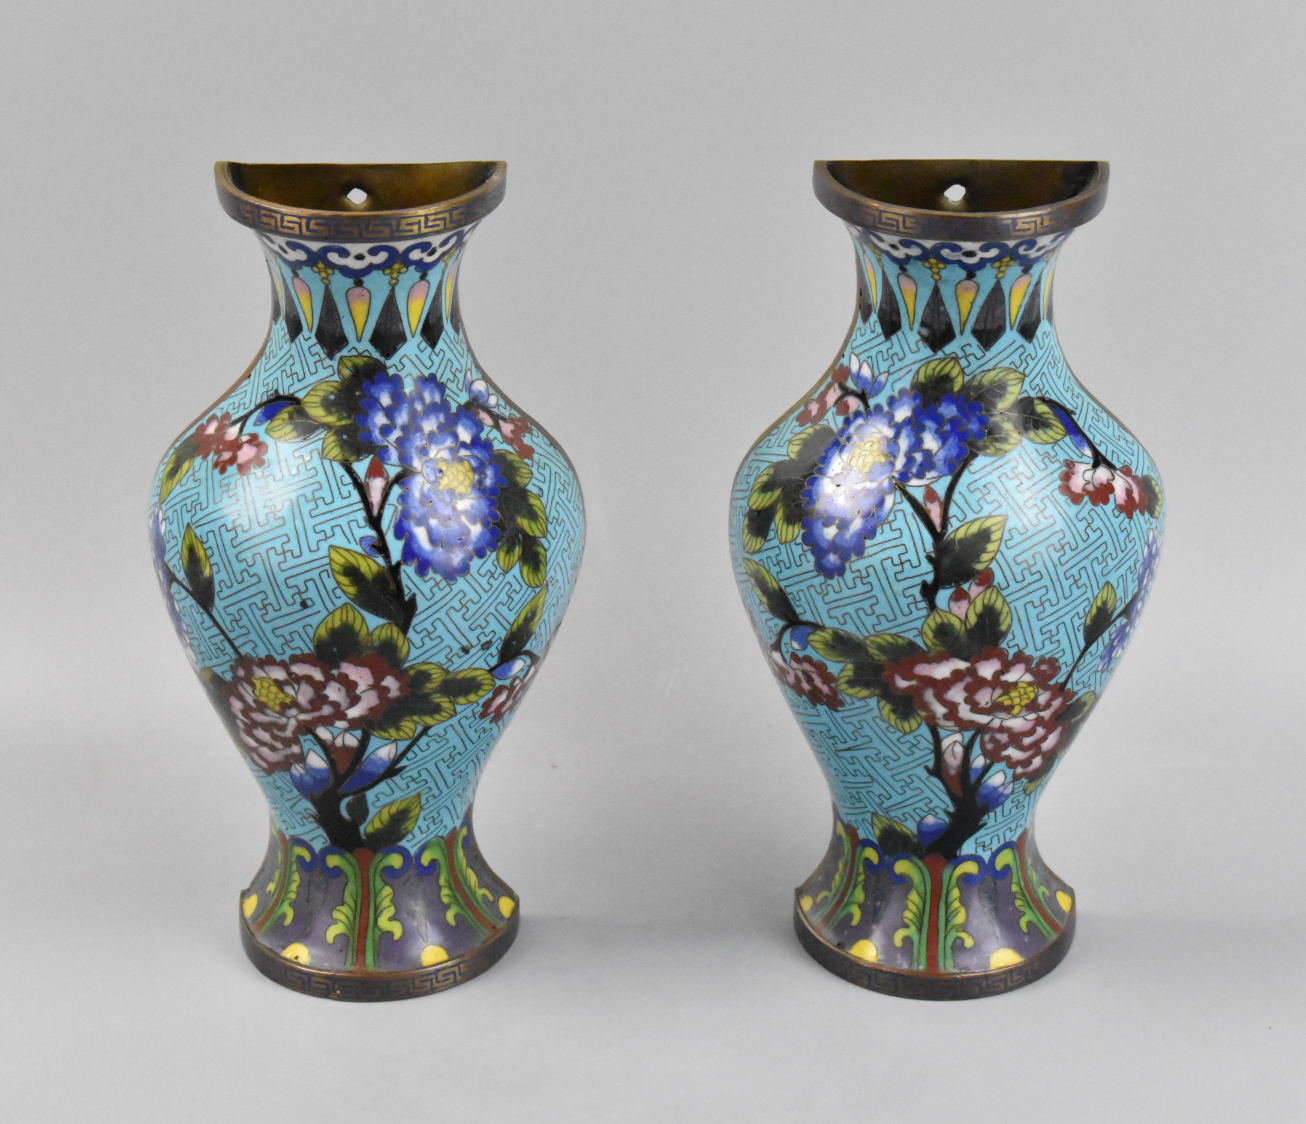 PAIR OF CHINESE CLOISONNE WALL 33a5e1